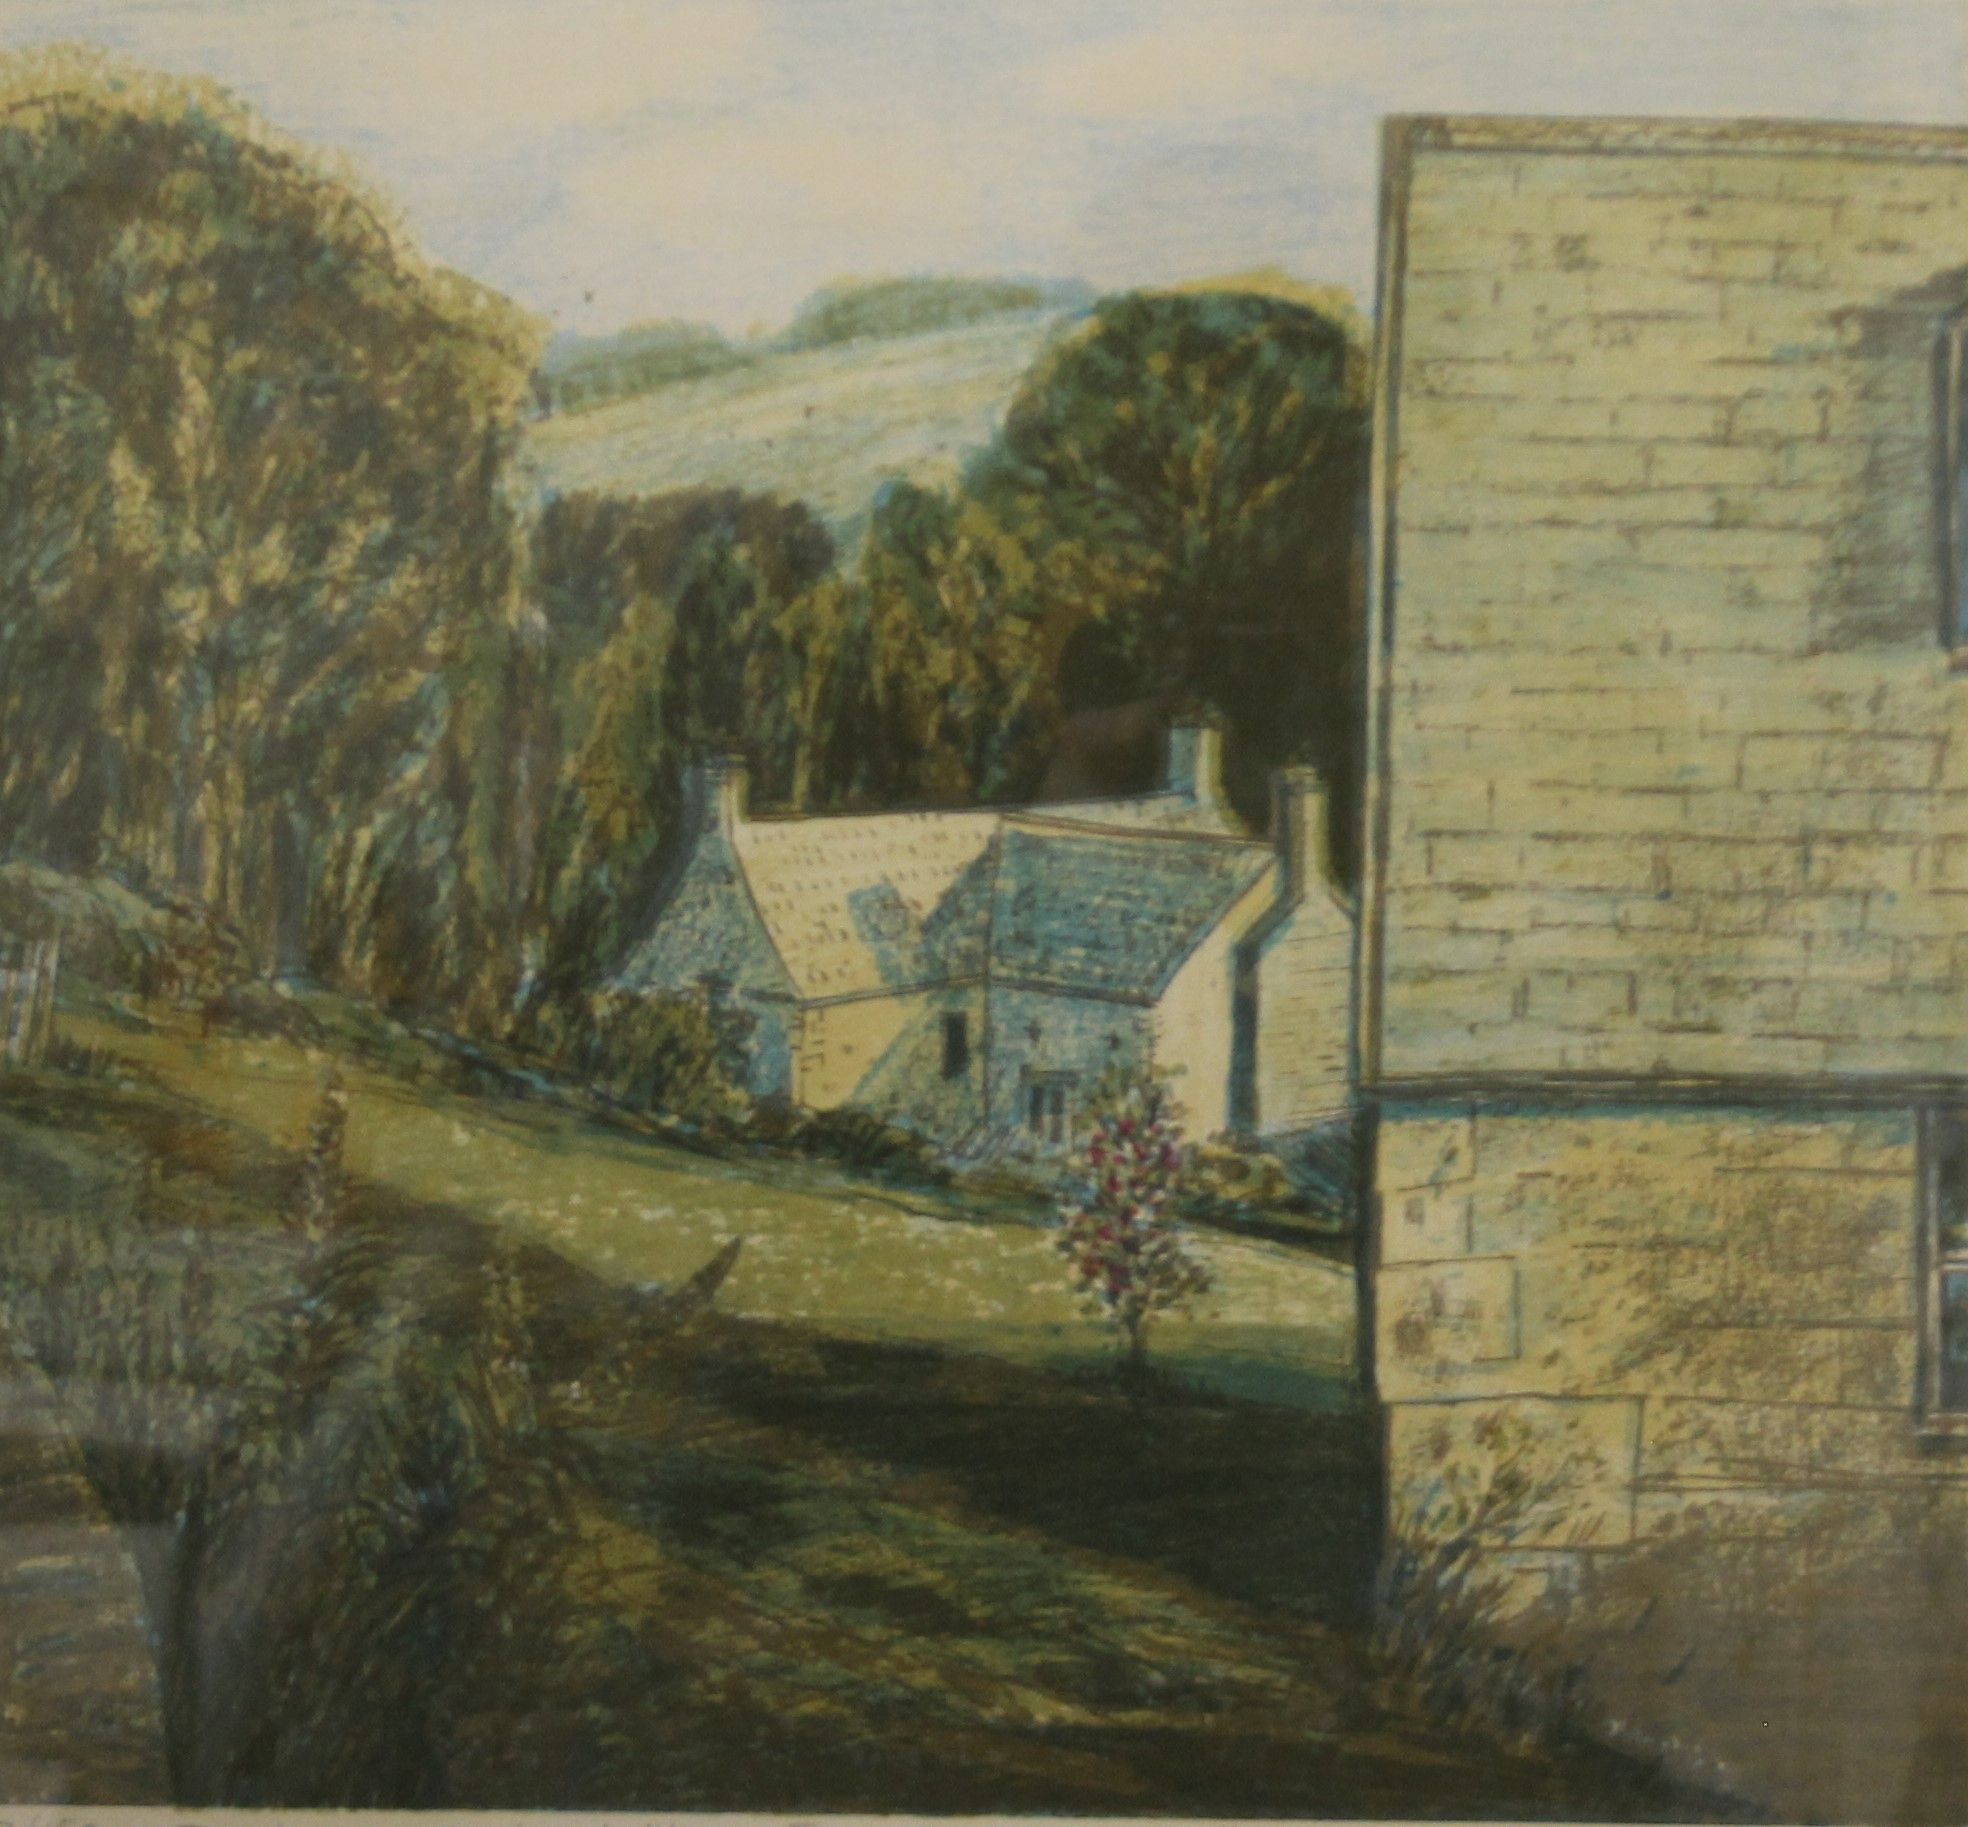 DON BESSANT, Country Landscape with quote by Laurie Lee, limited edition print, numbered 47/150,